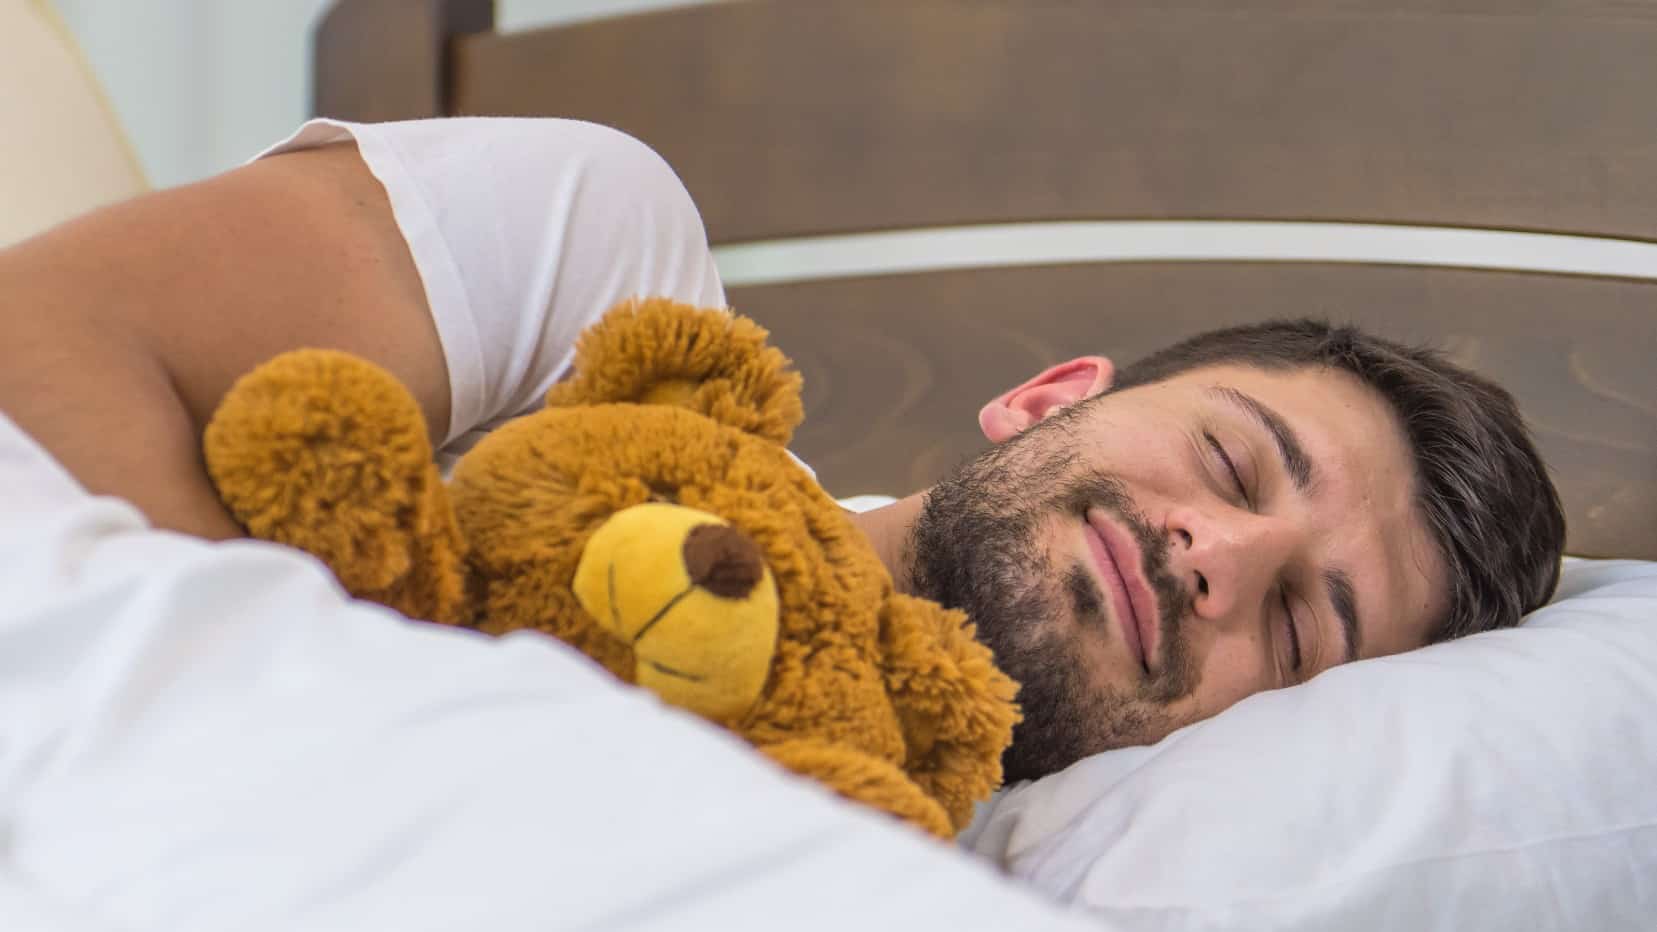 A man sleeps in a bed with white sheets while holding a teddy bear representing the improving performance of the Adairs share price